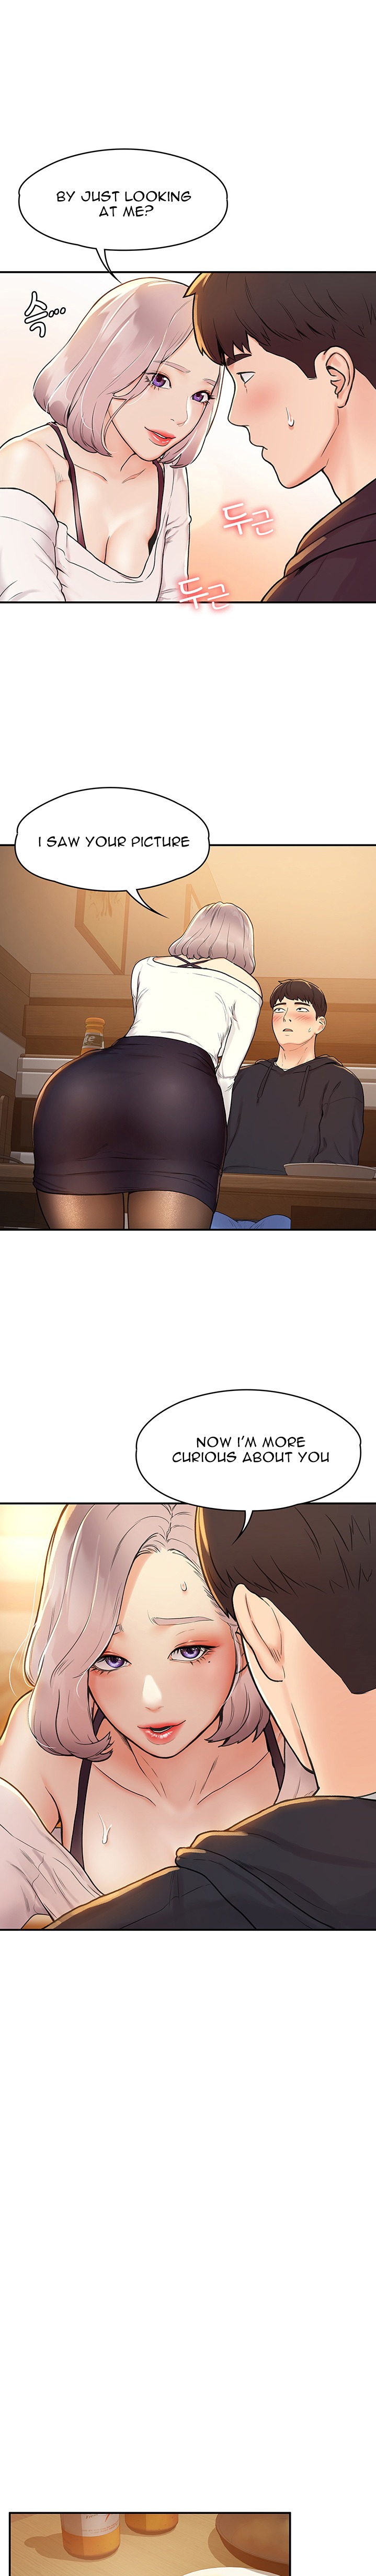 Campus Today - Chapter 3 Page 14